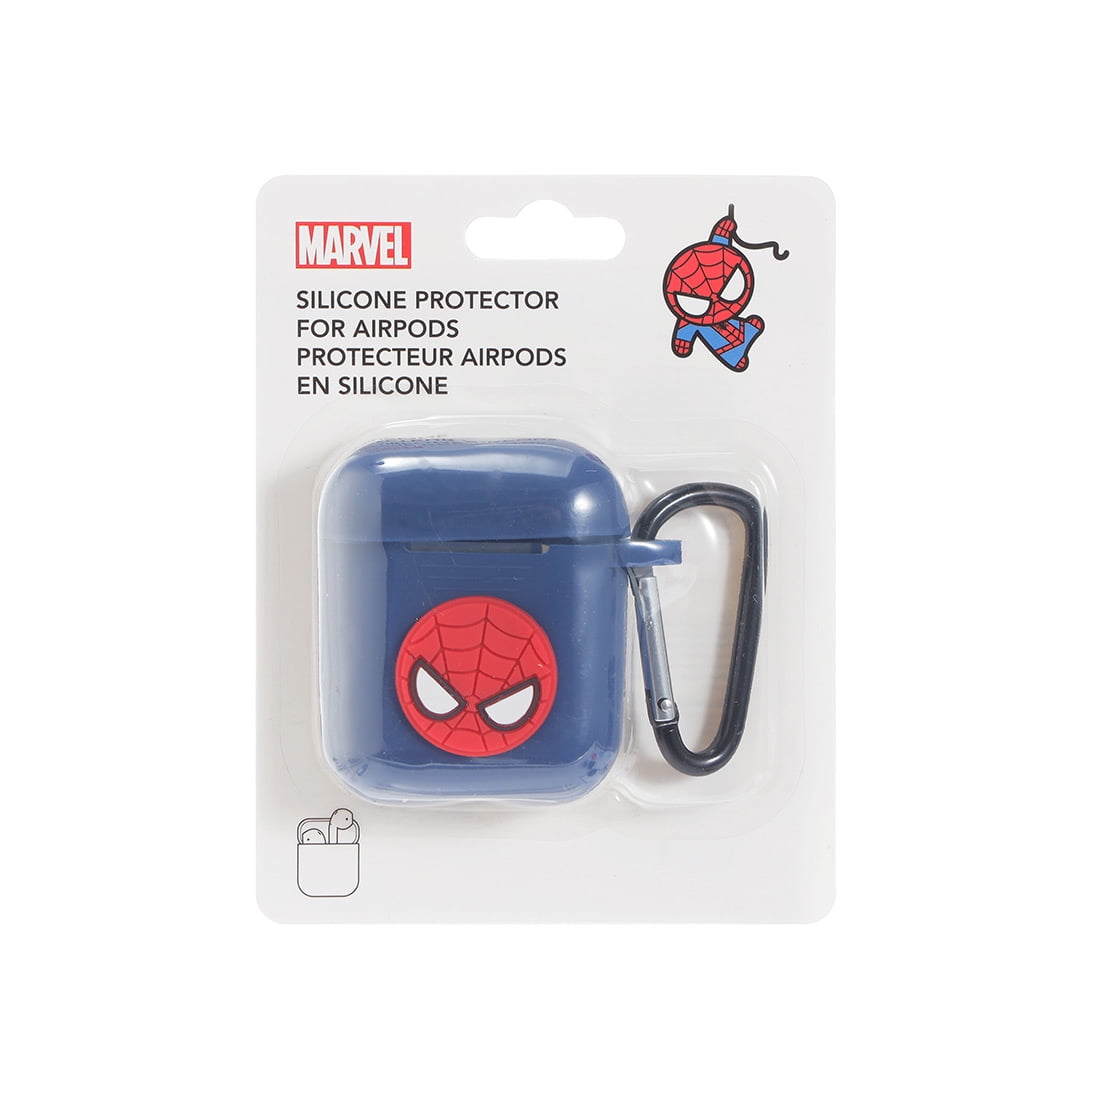  MINISO  Marvel  Airpods Case  Cartoon Silicone Airpods Cover 